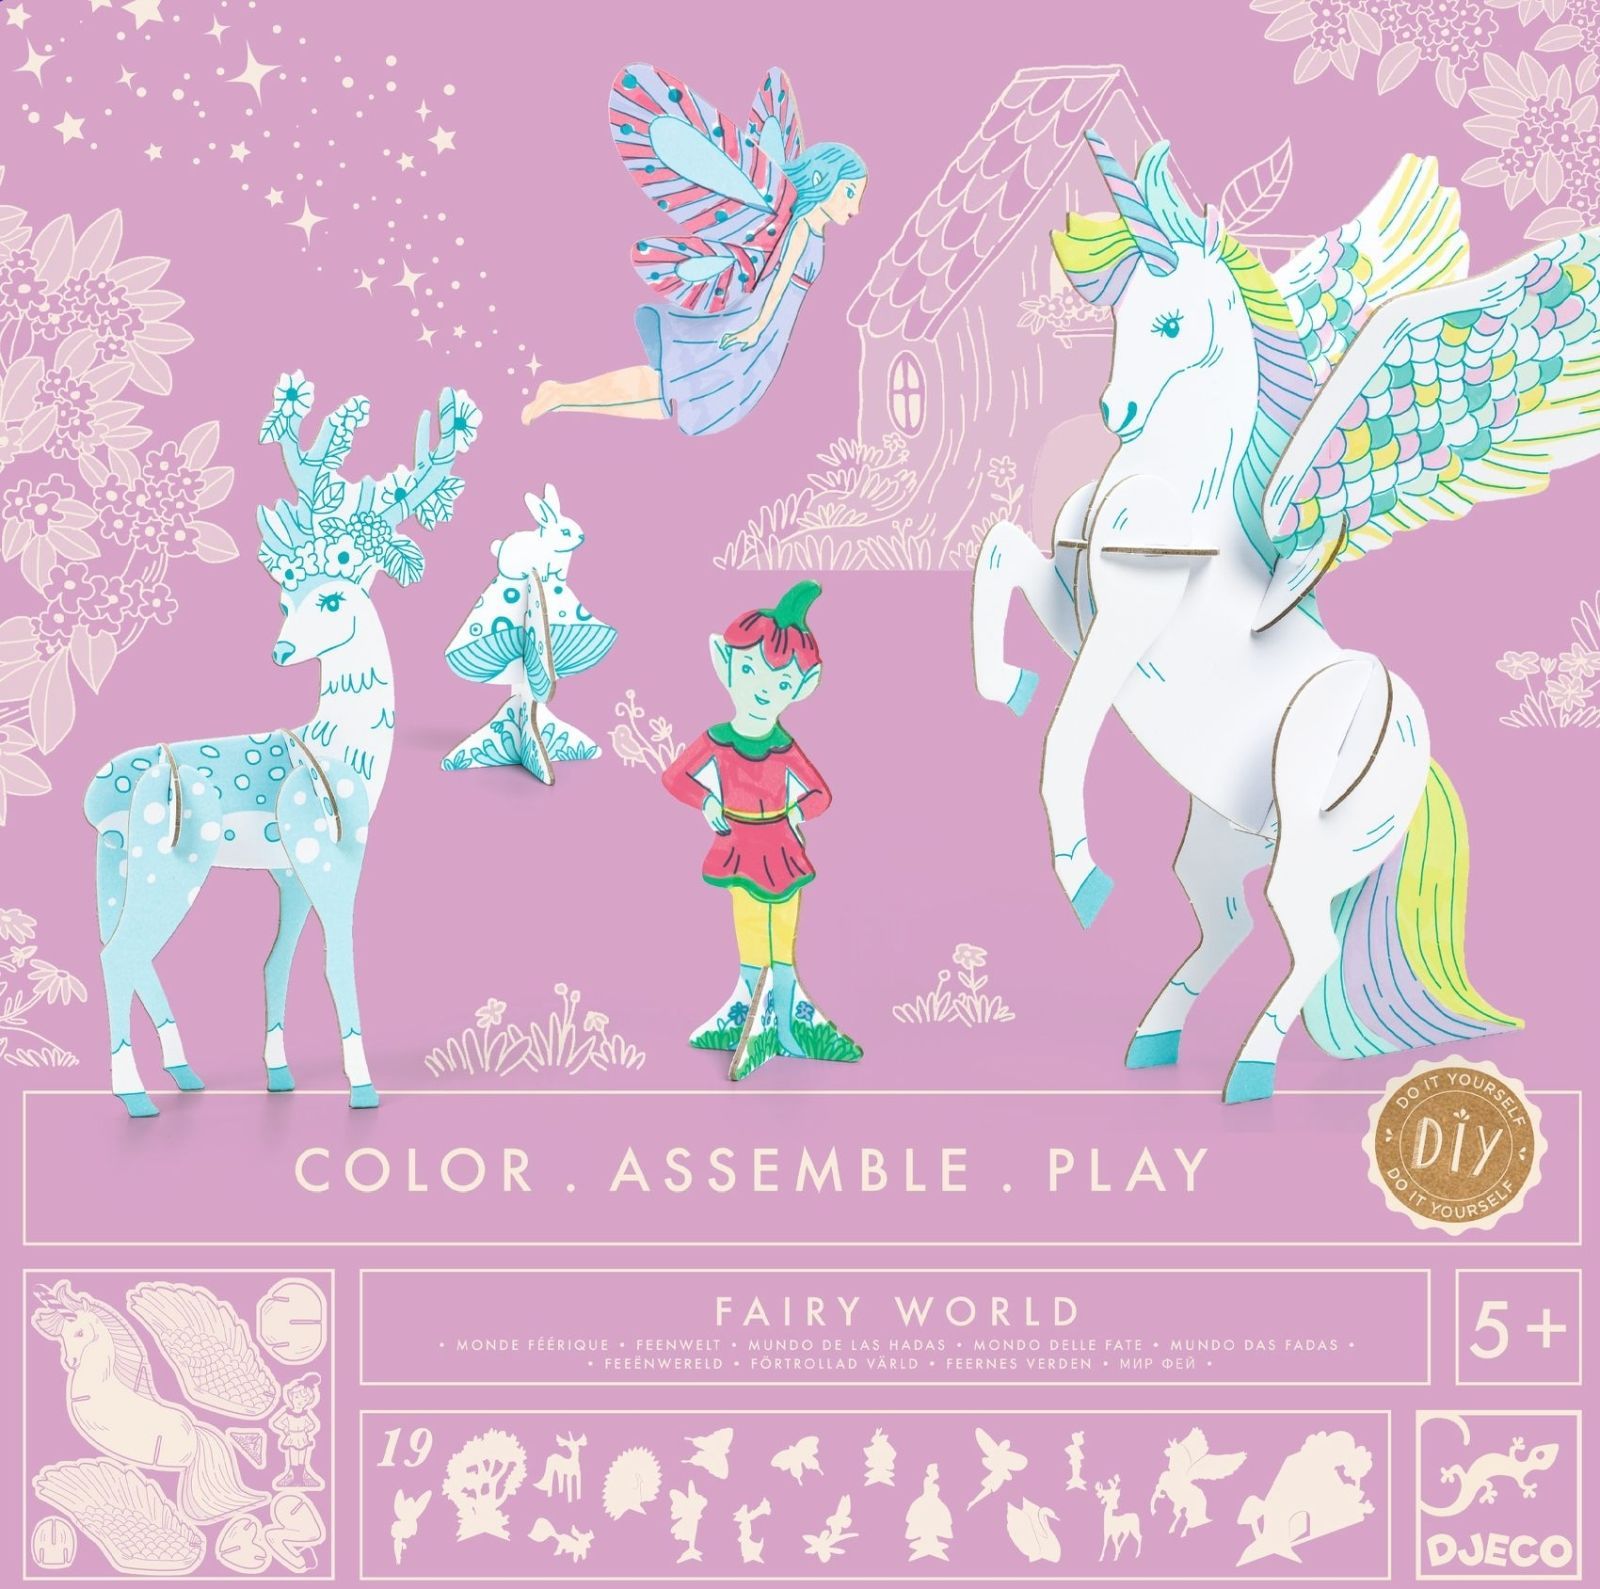 Djeco Do it yourself - Color.Assemble.Play Fairy world